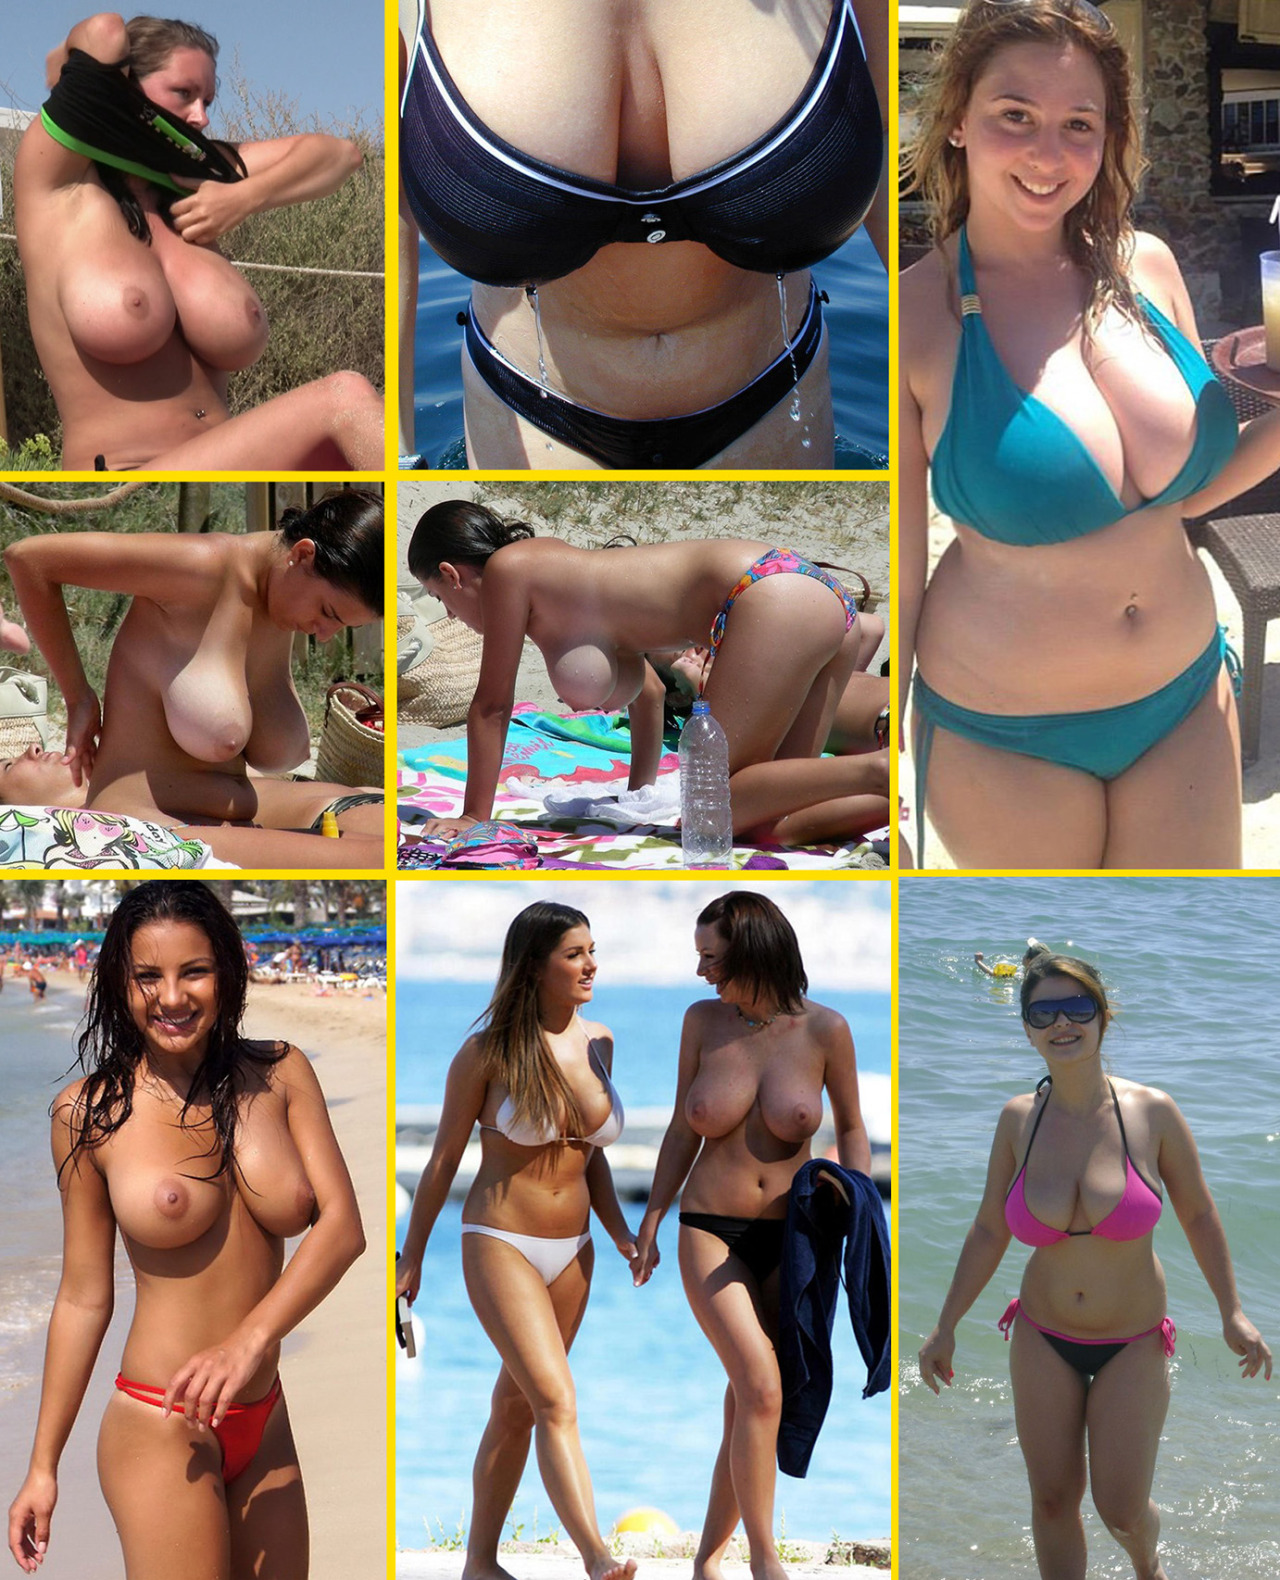 Nobreasttoobig - Some Damn Good Reasons To Head To The Beach picture 10 of 10